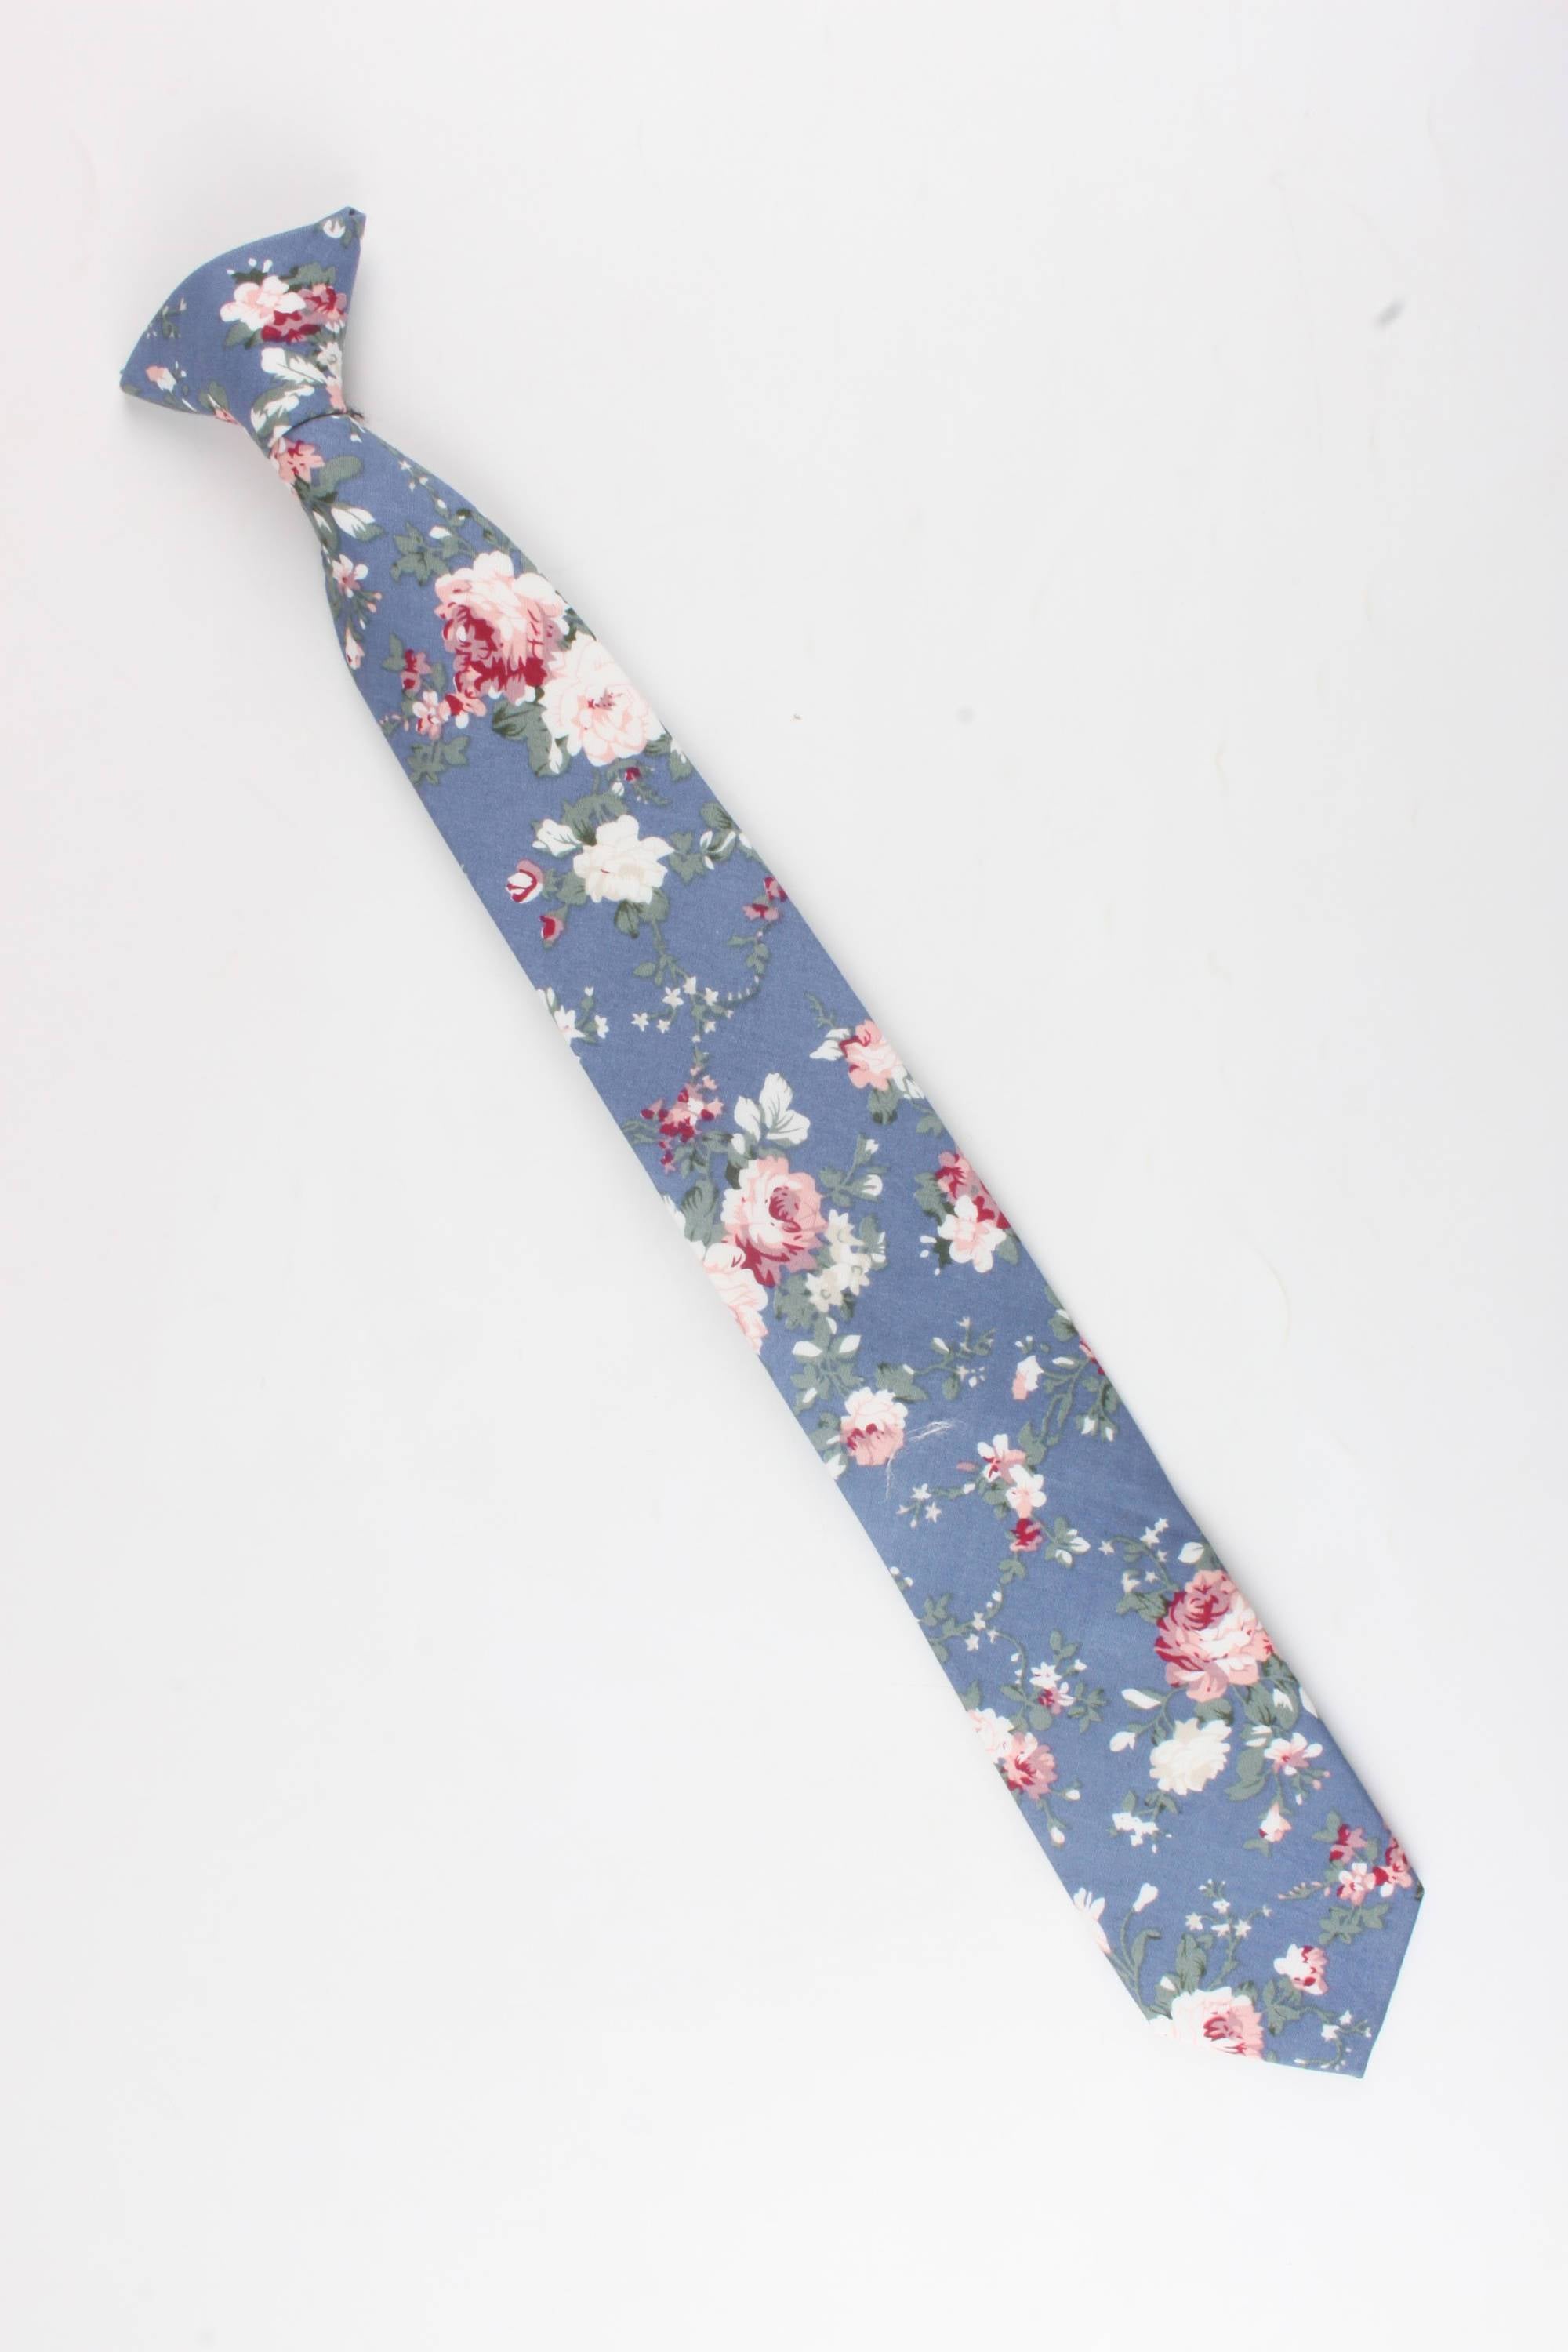 Boys Floral Clip On Tie 2.3&quot; NEIL-Boys Floral Clip On Tie Material:Cotton Blend Approx Size: Max width: 6.5 cm / 2.4 inches 9-24 months 26 CM2-5 years 31 CM9-11 Years 43 CM Get your little man looking sharp with this blue floral print tie. This dapper clip-on tie is perfect for any formal occasion, from weddings to christenings. The blue floral print is just the right amount of dainty, and the fit is tailored to fit boys of all ages. With a versatile style that can be dressed up or down, this ti